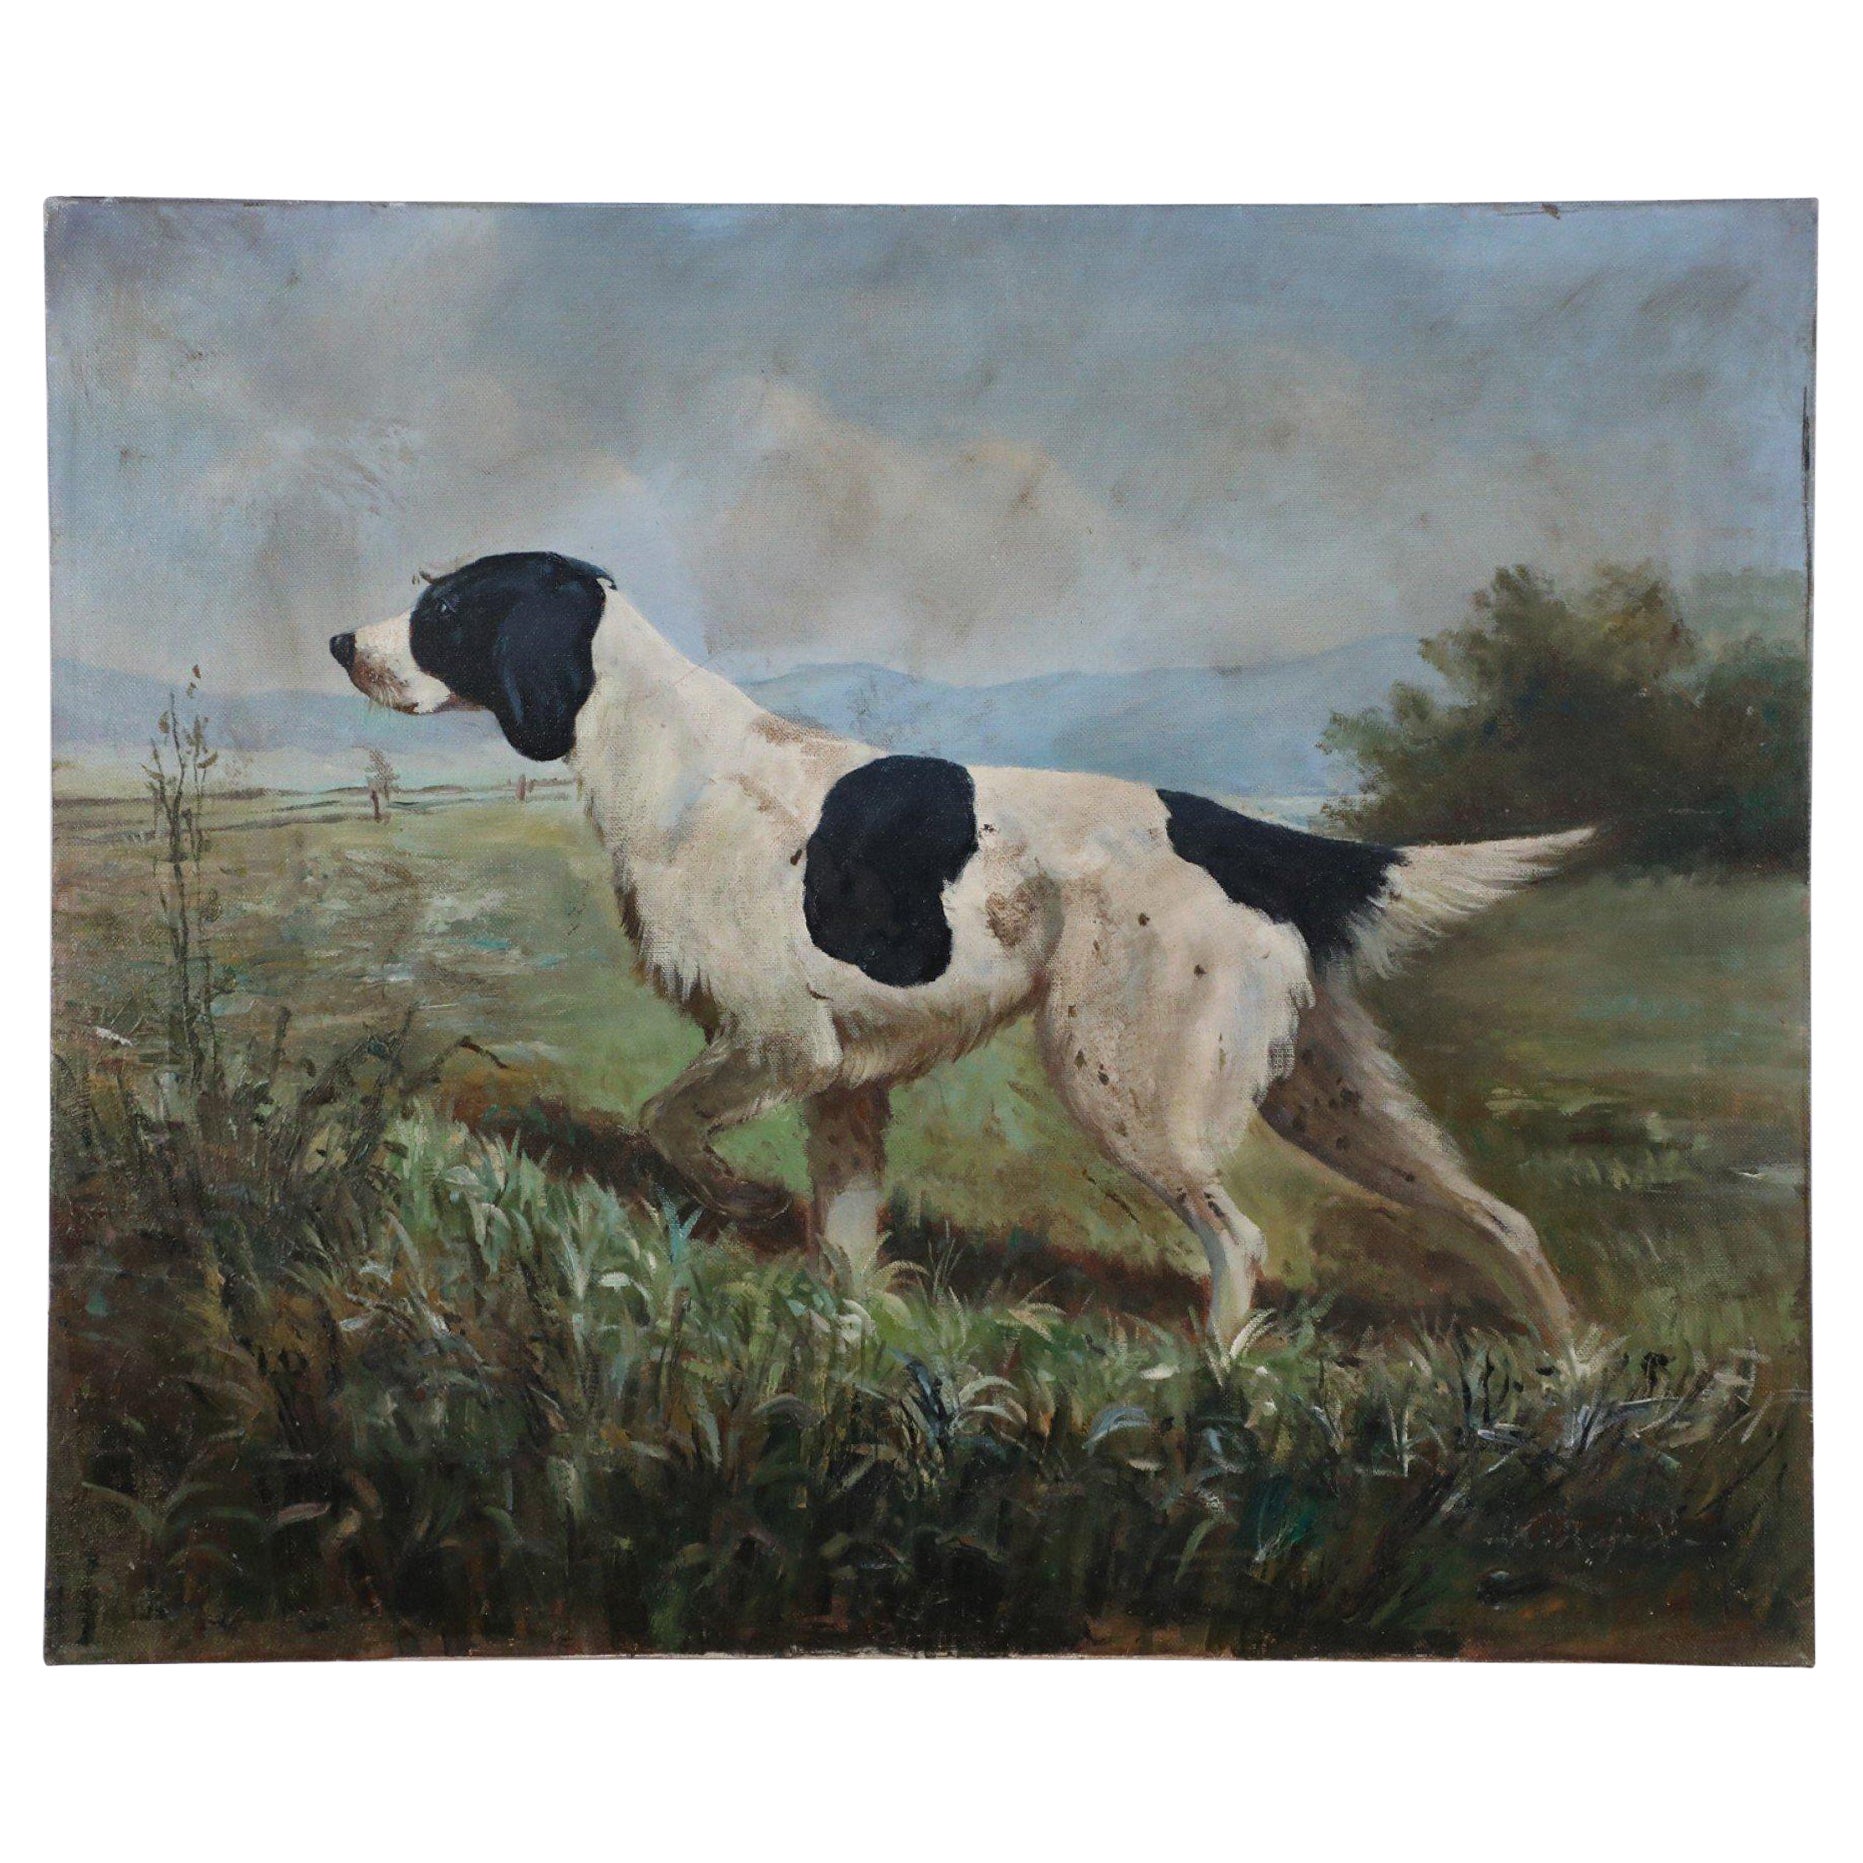 Vintage Black and White Hunting Dog Oil Painting on Canvas